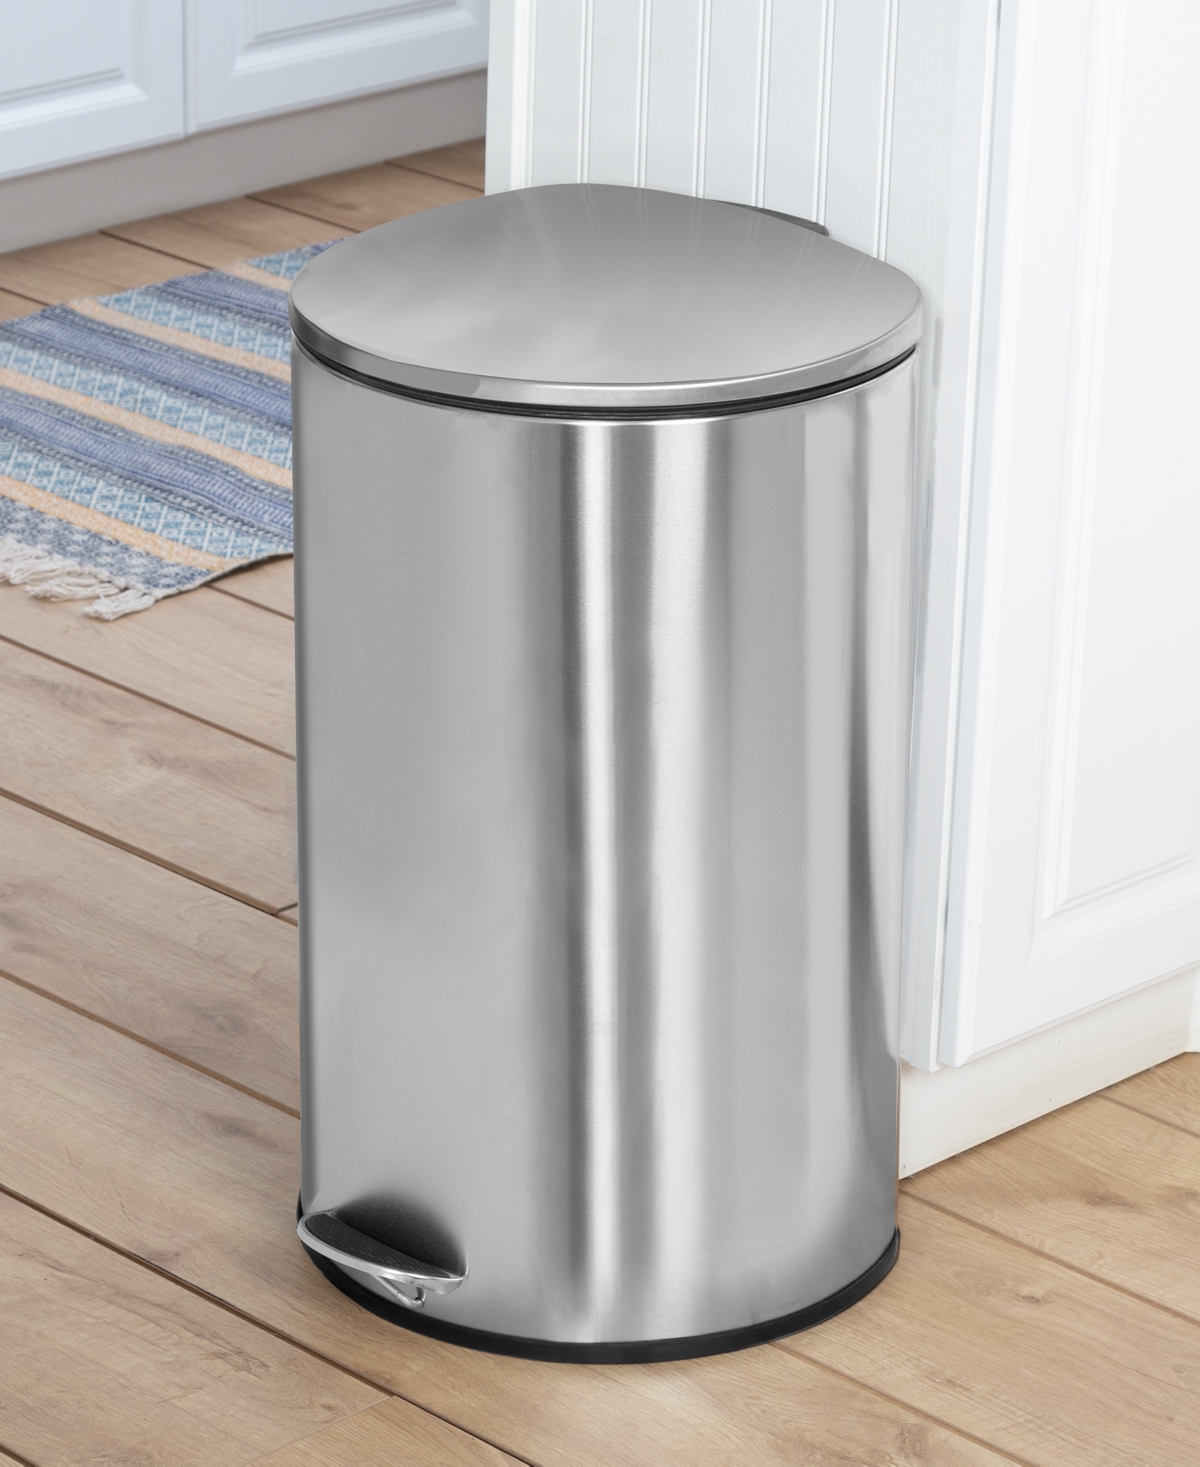 40-Liter Semi-Round Stainless Steel Step Trash Can with Lid - Silver